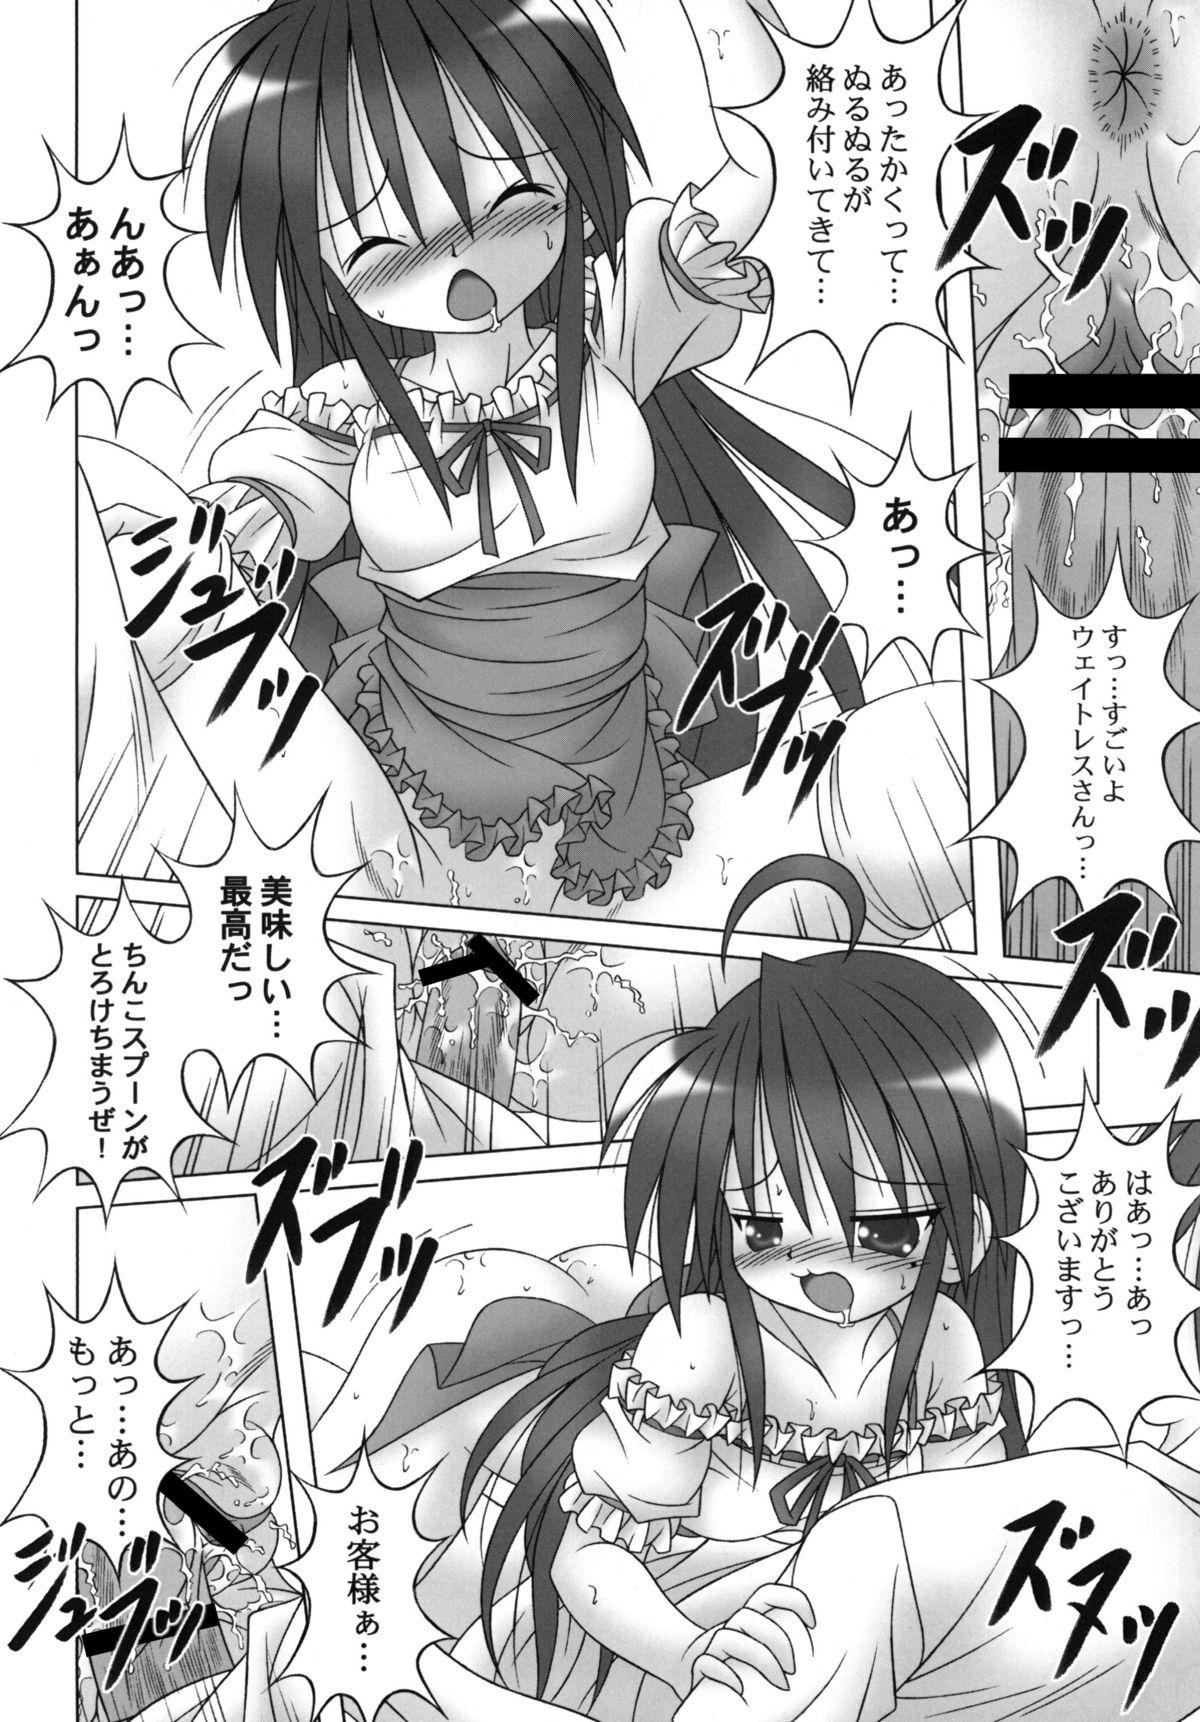 Boots LUCKY☆START - Lucky star Spooning - Page 12